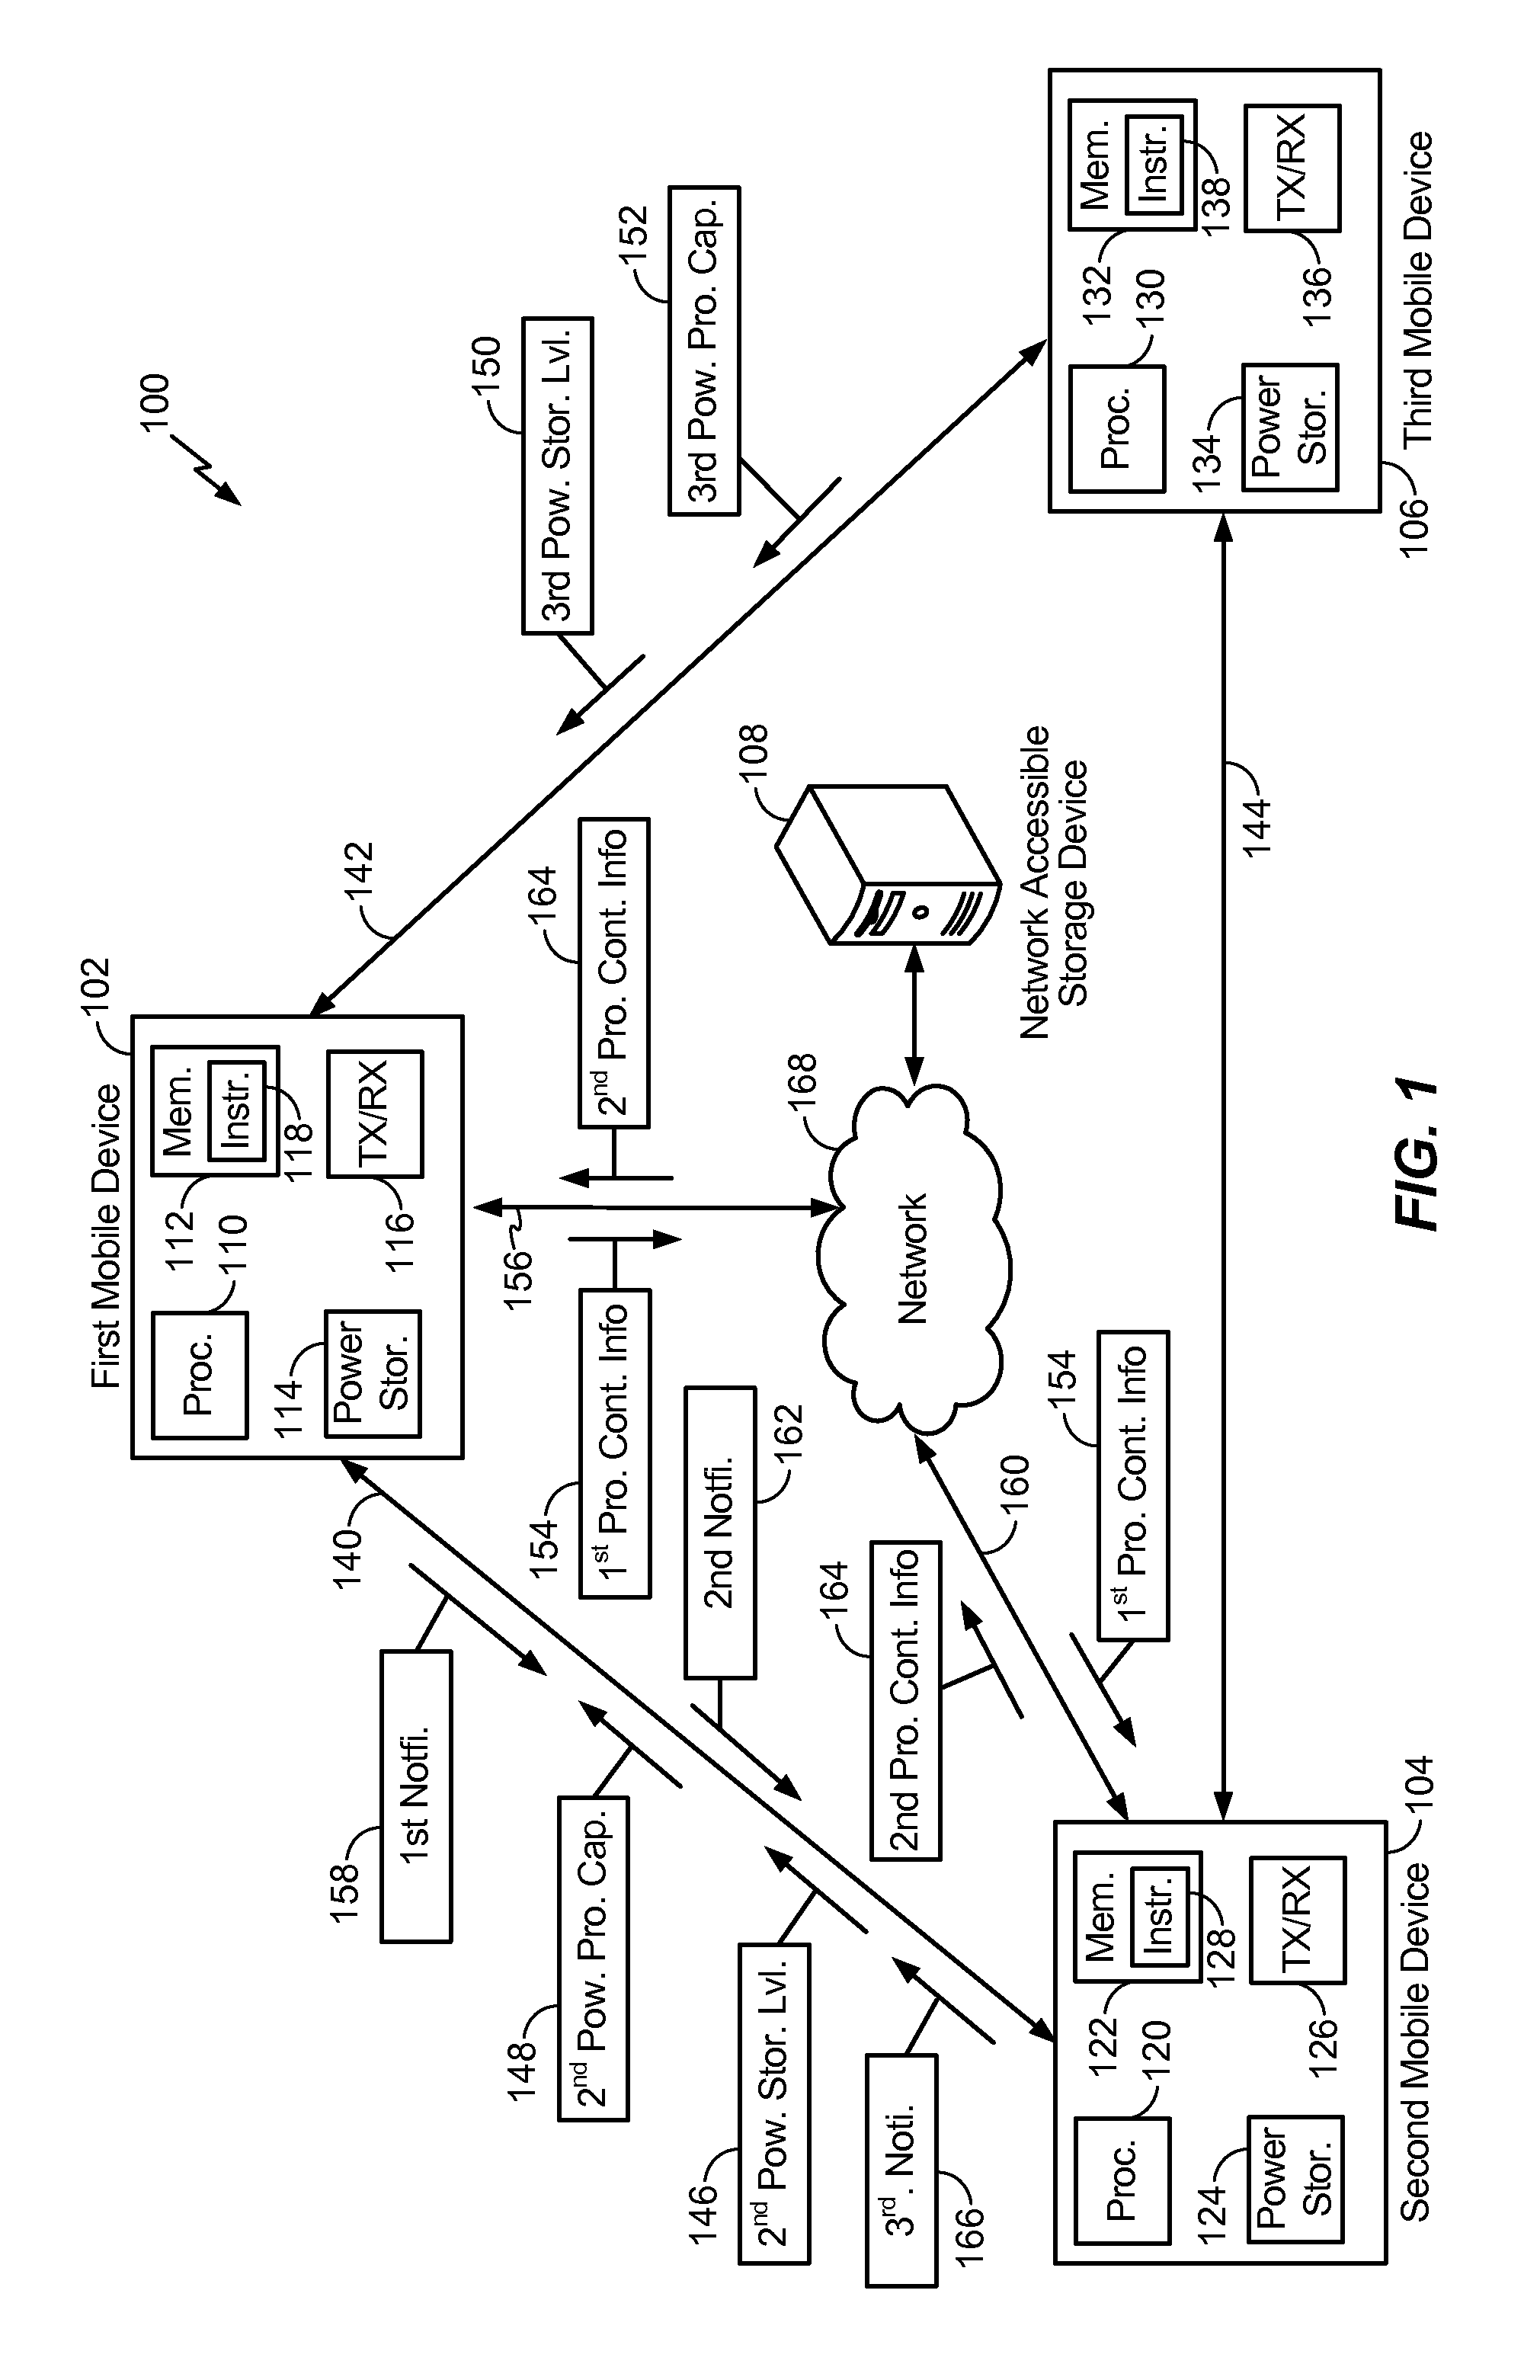 System and methods of transferring tasks from a first mobile device to a second mobile device